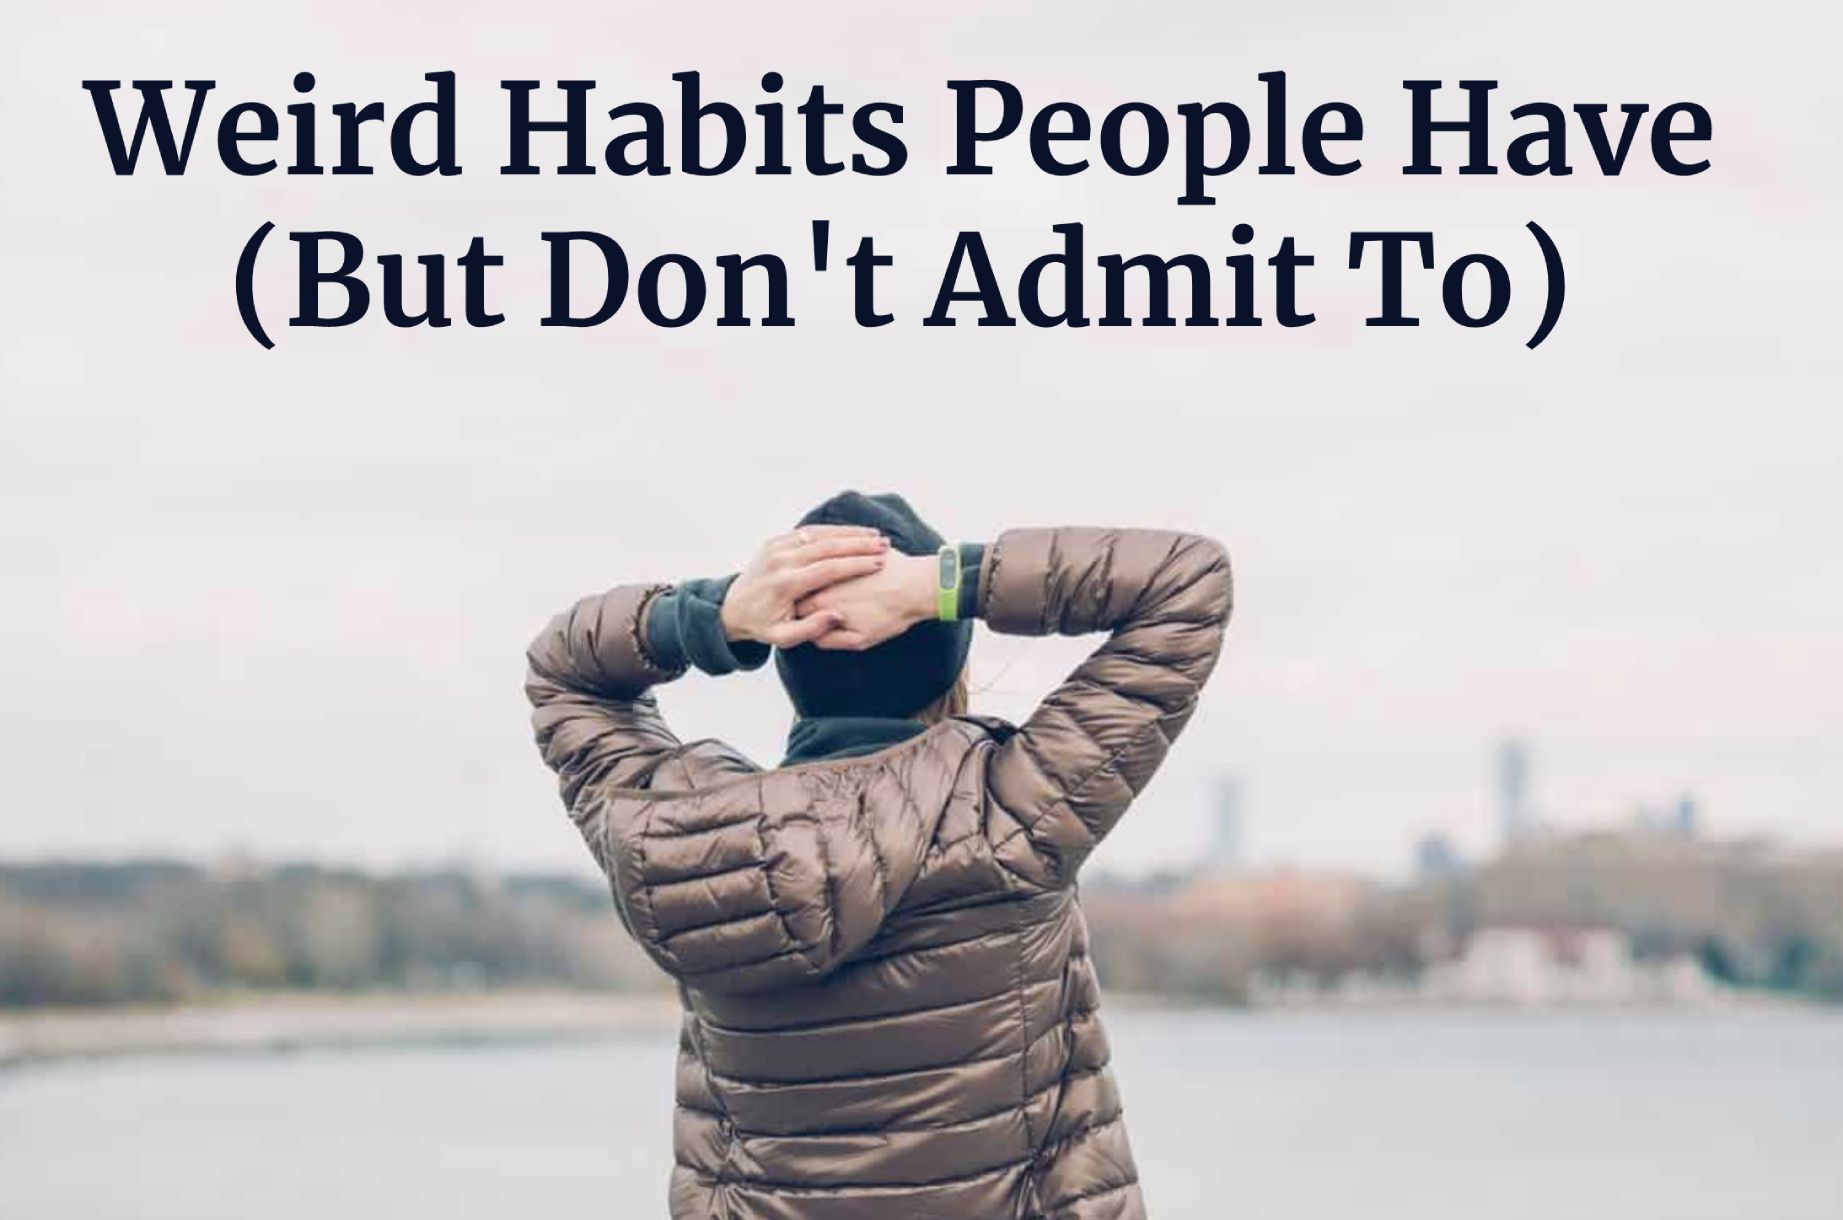 Weird Habits People Have (But Don't Admit To)